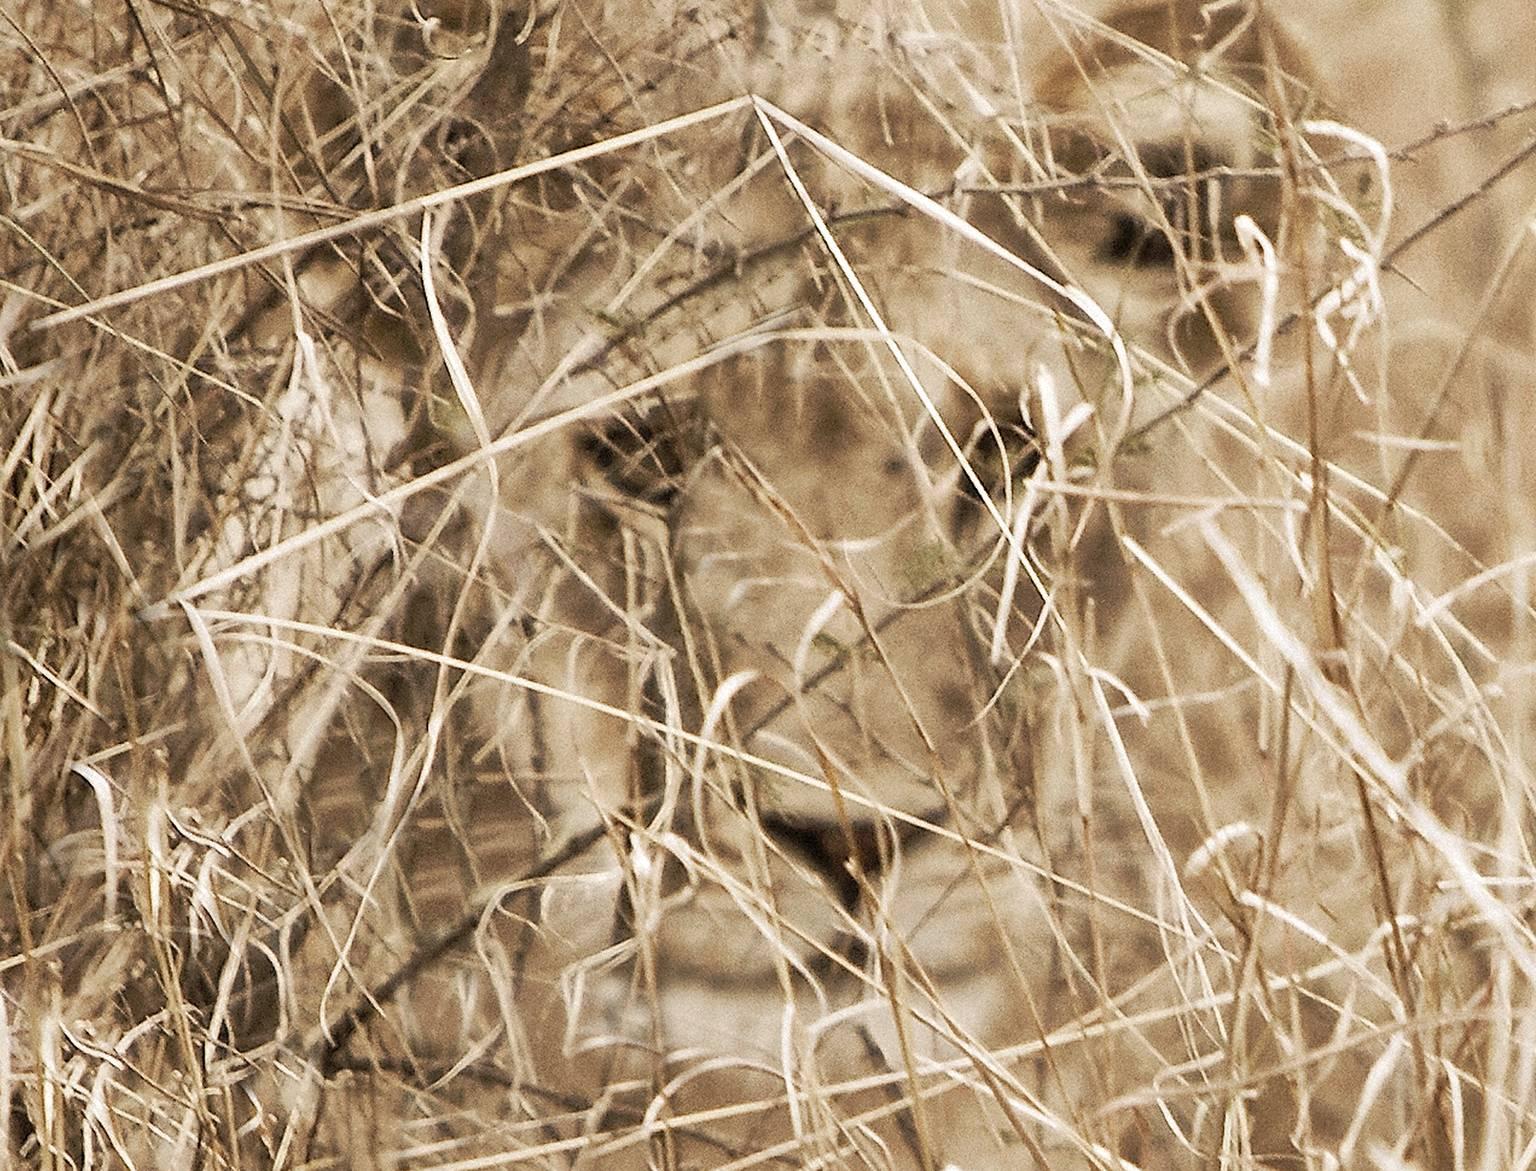 Lion in Grass - Photograph by Chris Gordaneer